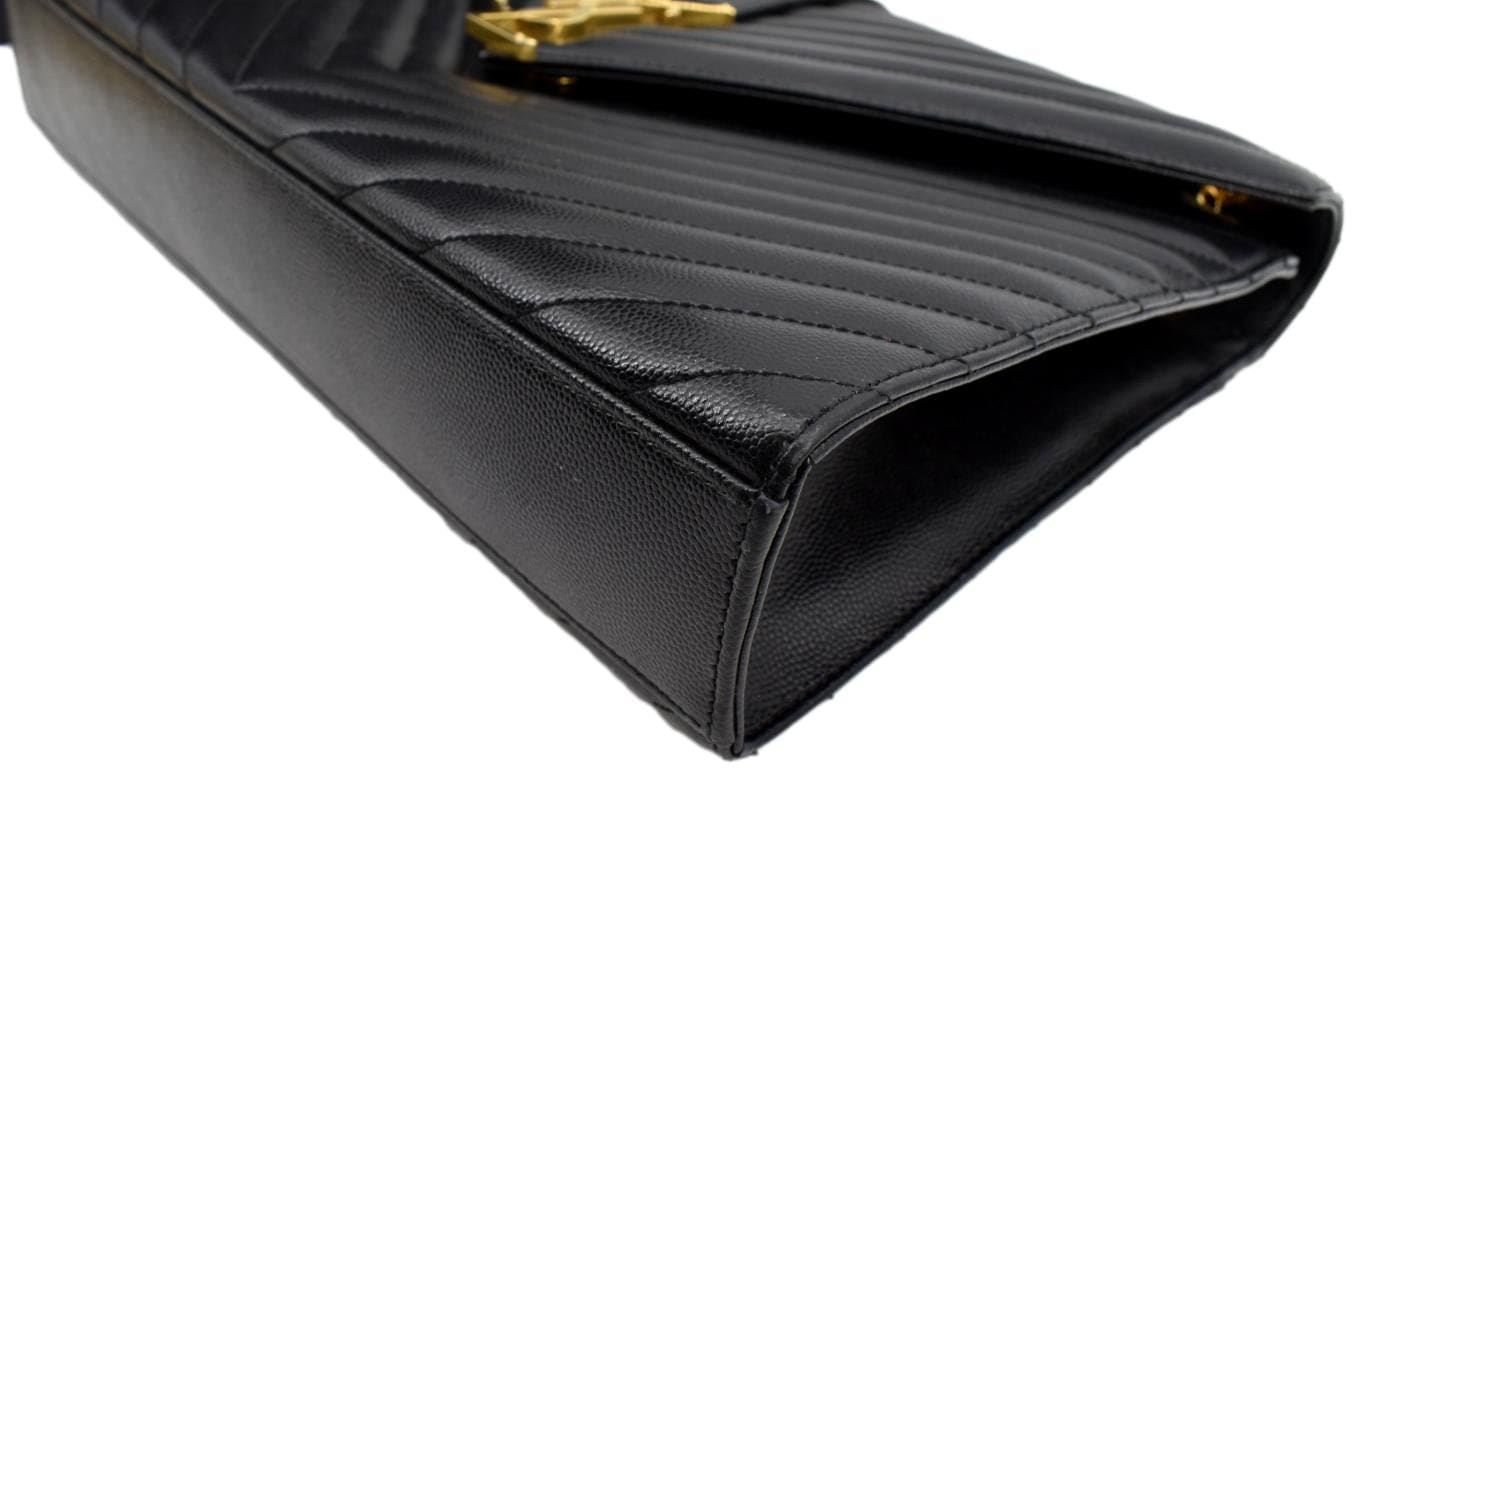 Saint Laurent Wallet on Chain Large in Black Grained Leather and